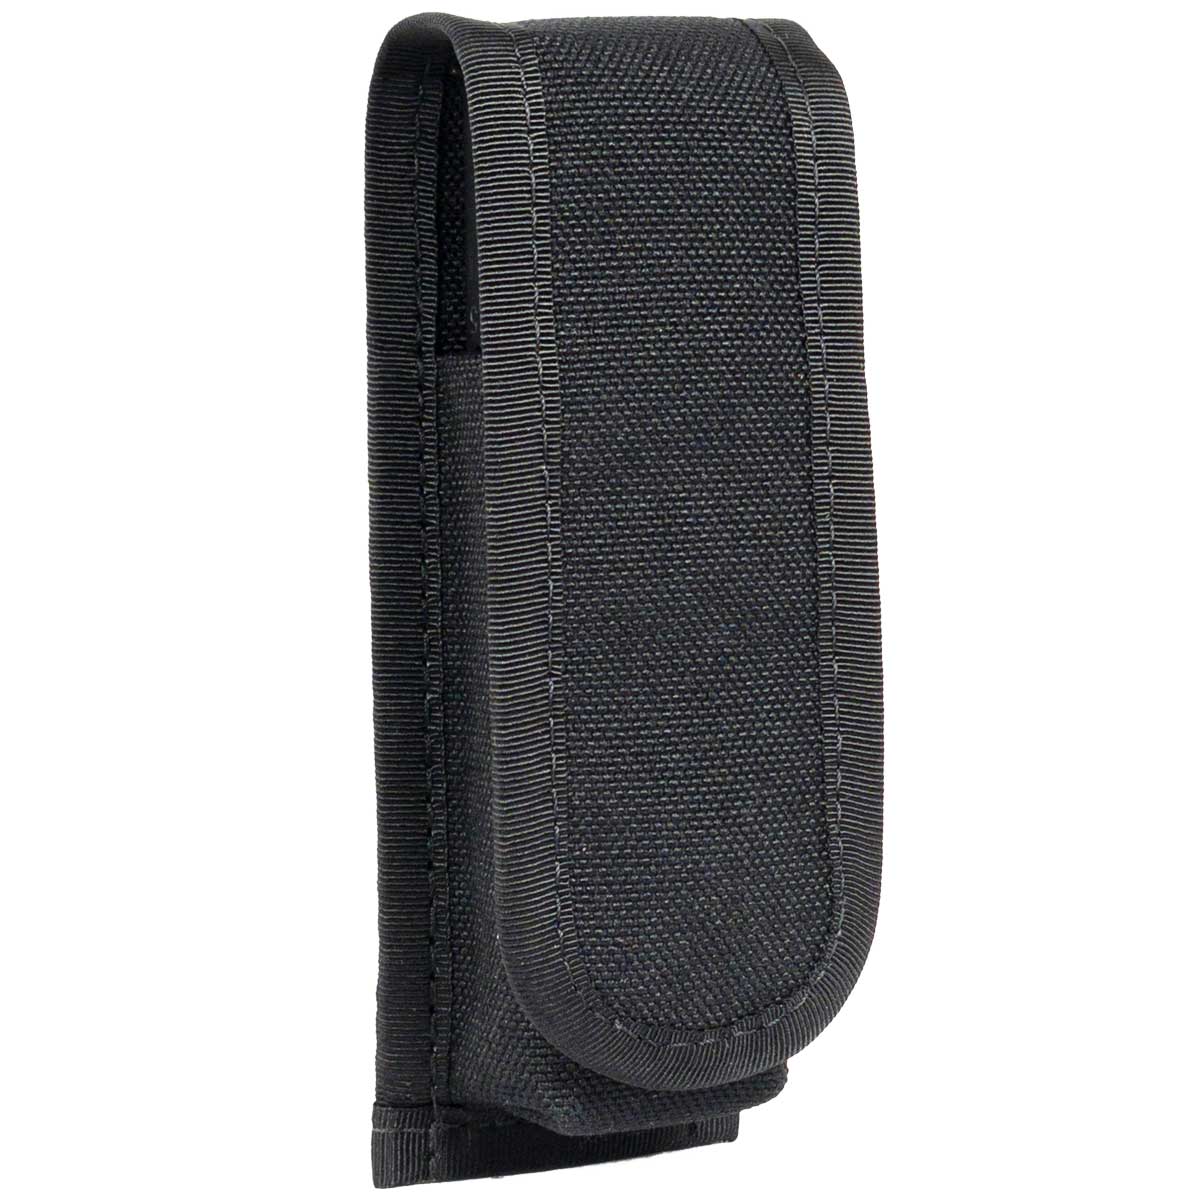 Single Mag Flap Molle Pocket for Cowell Tactical Vest